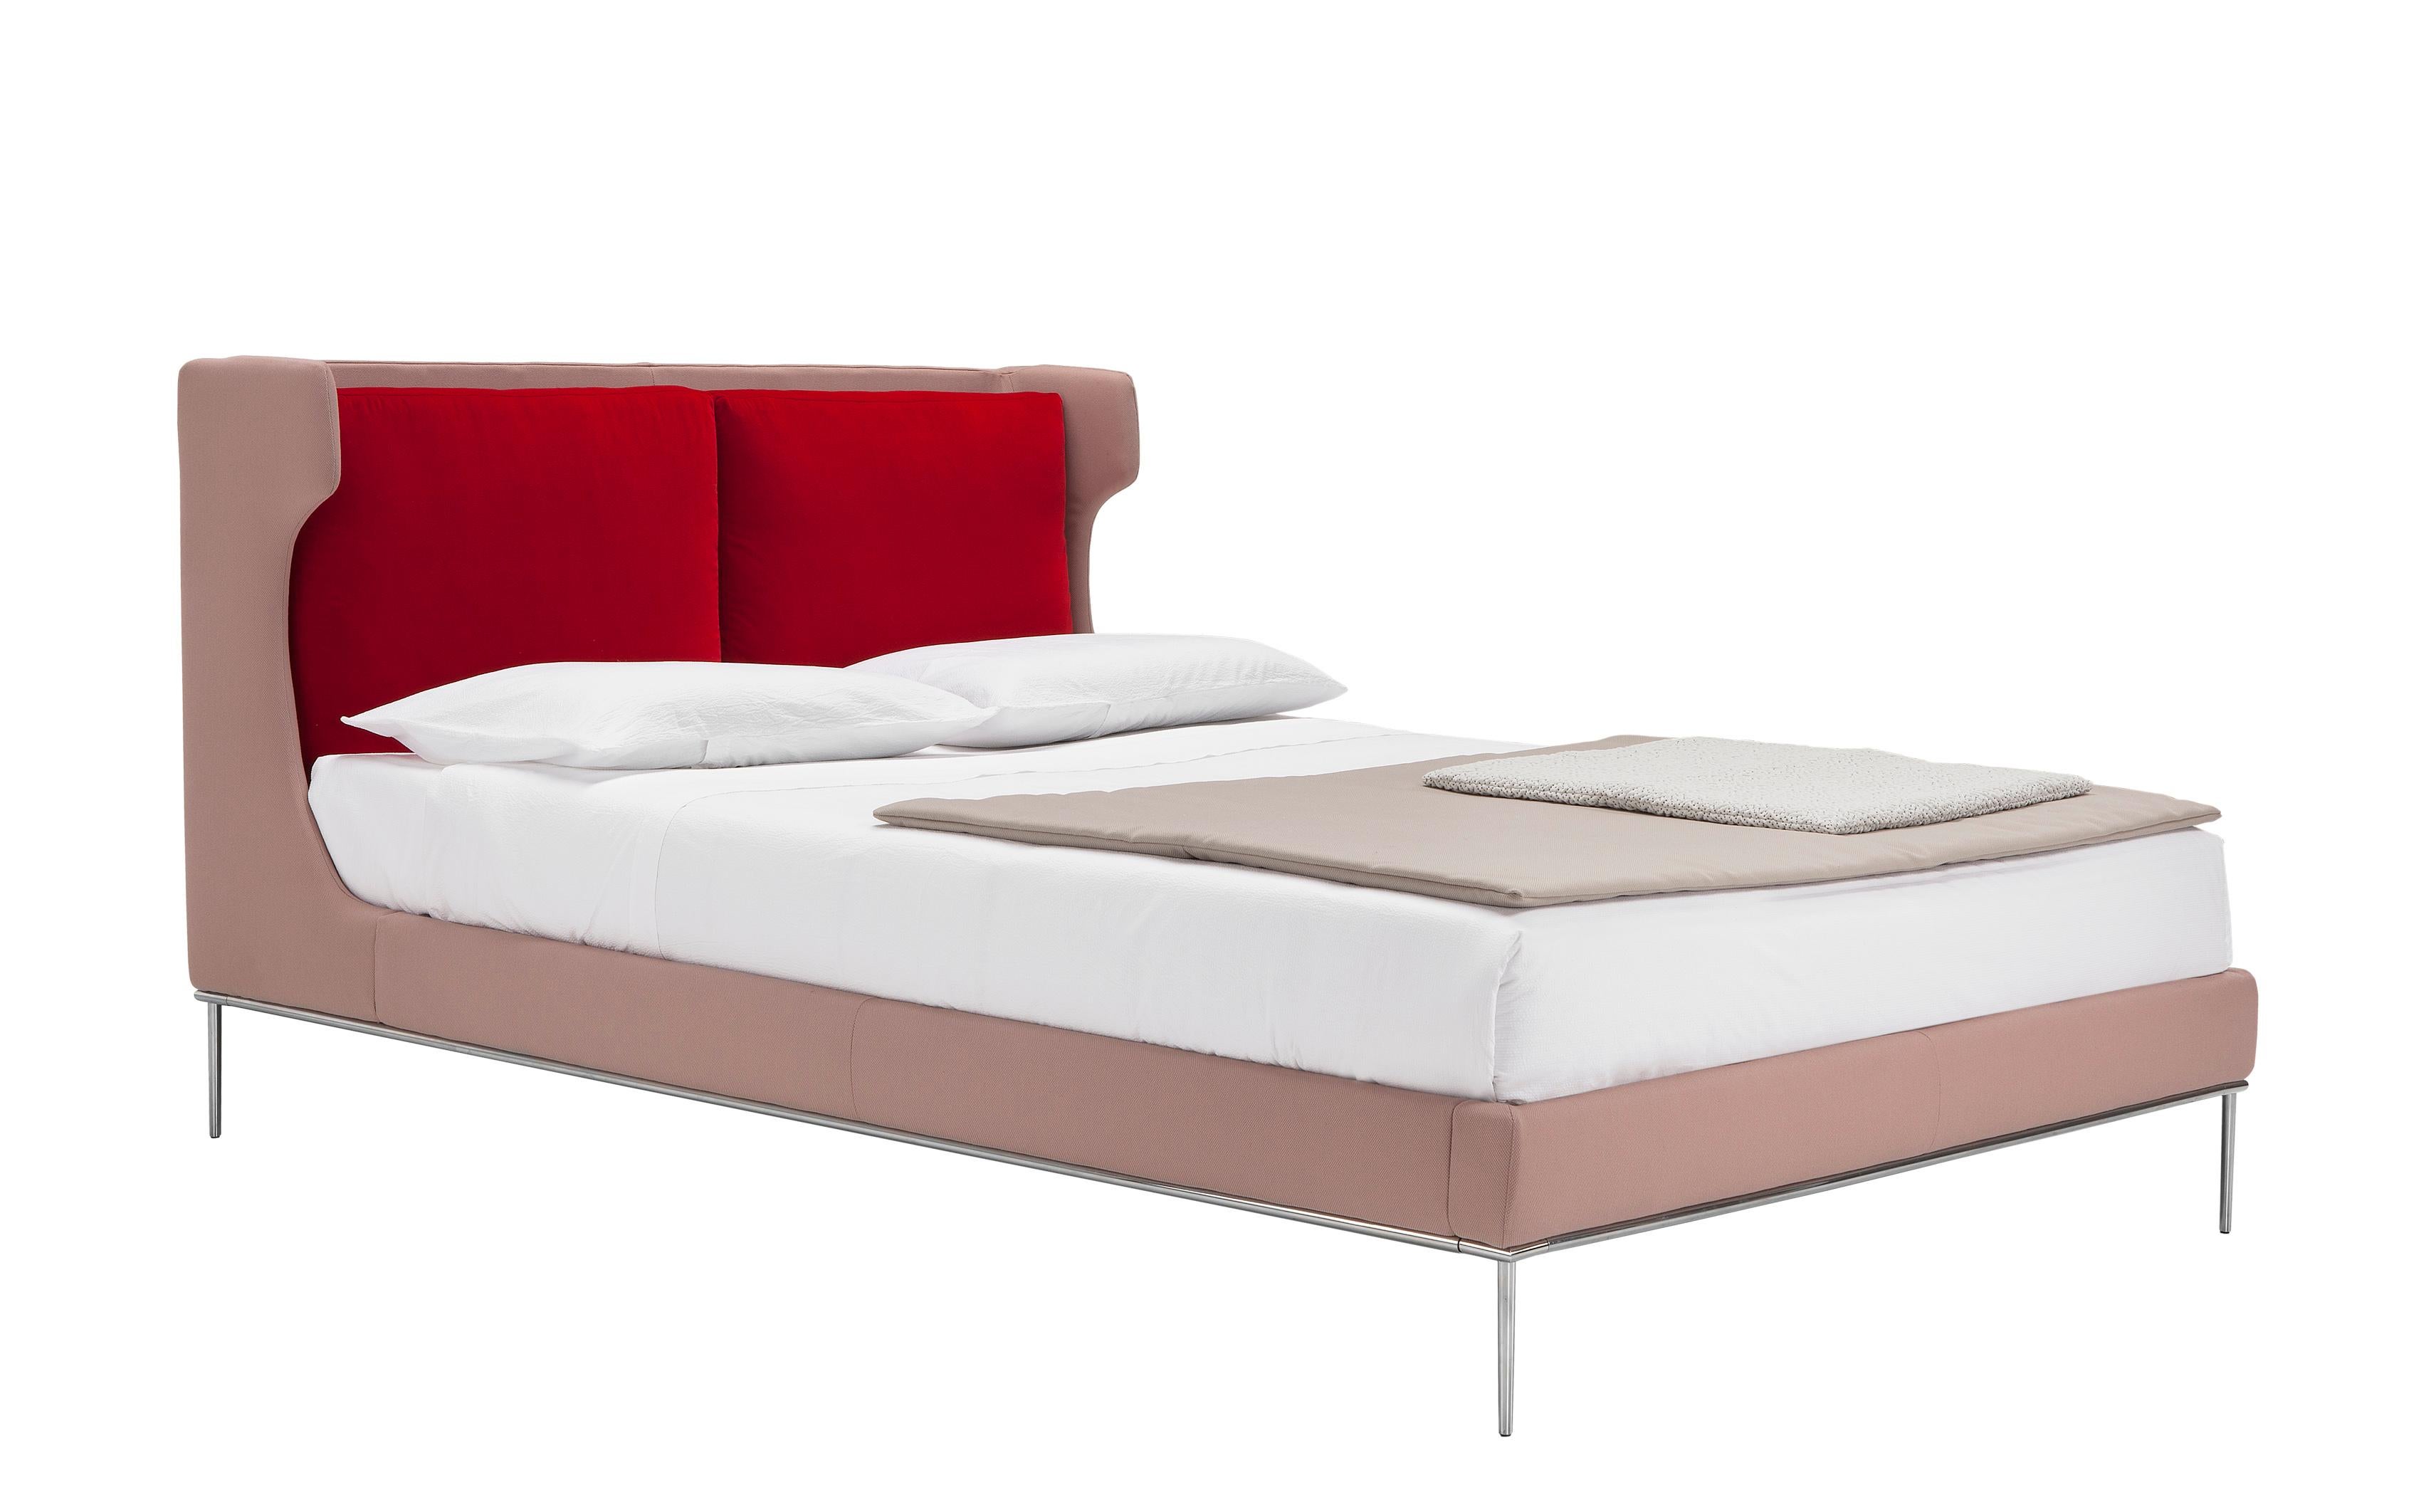 The Alice bed is an elegant proposal that combines sinuous design, thickness control and great elegance. A sign of great contemporaneity and classicity at the same time, the bed of Alice's collection is light and light and its encumbrance in space